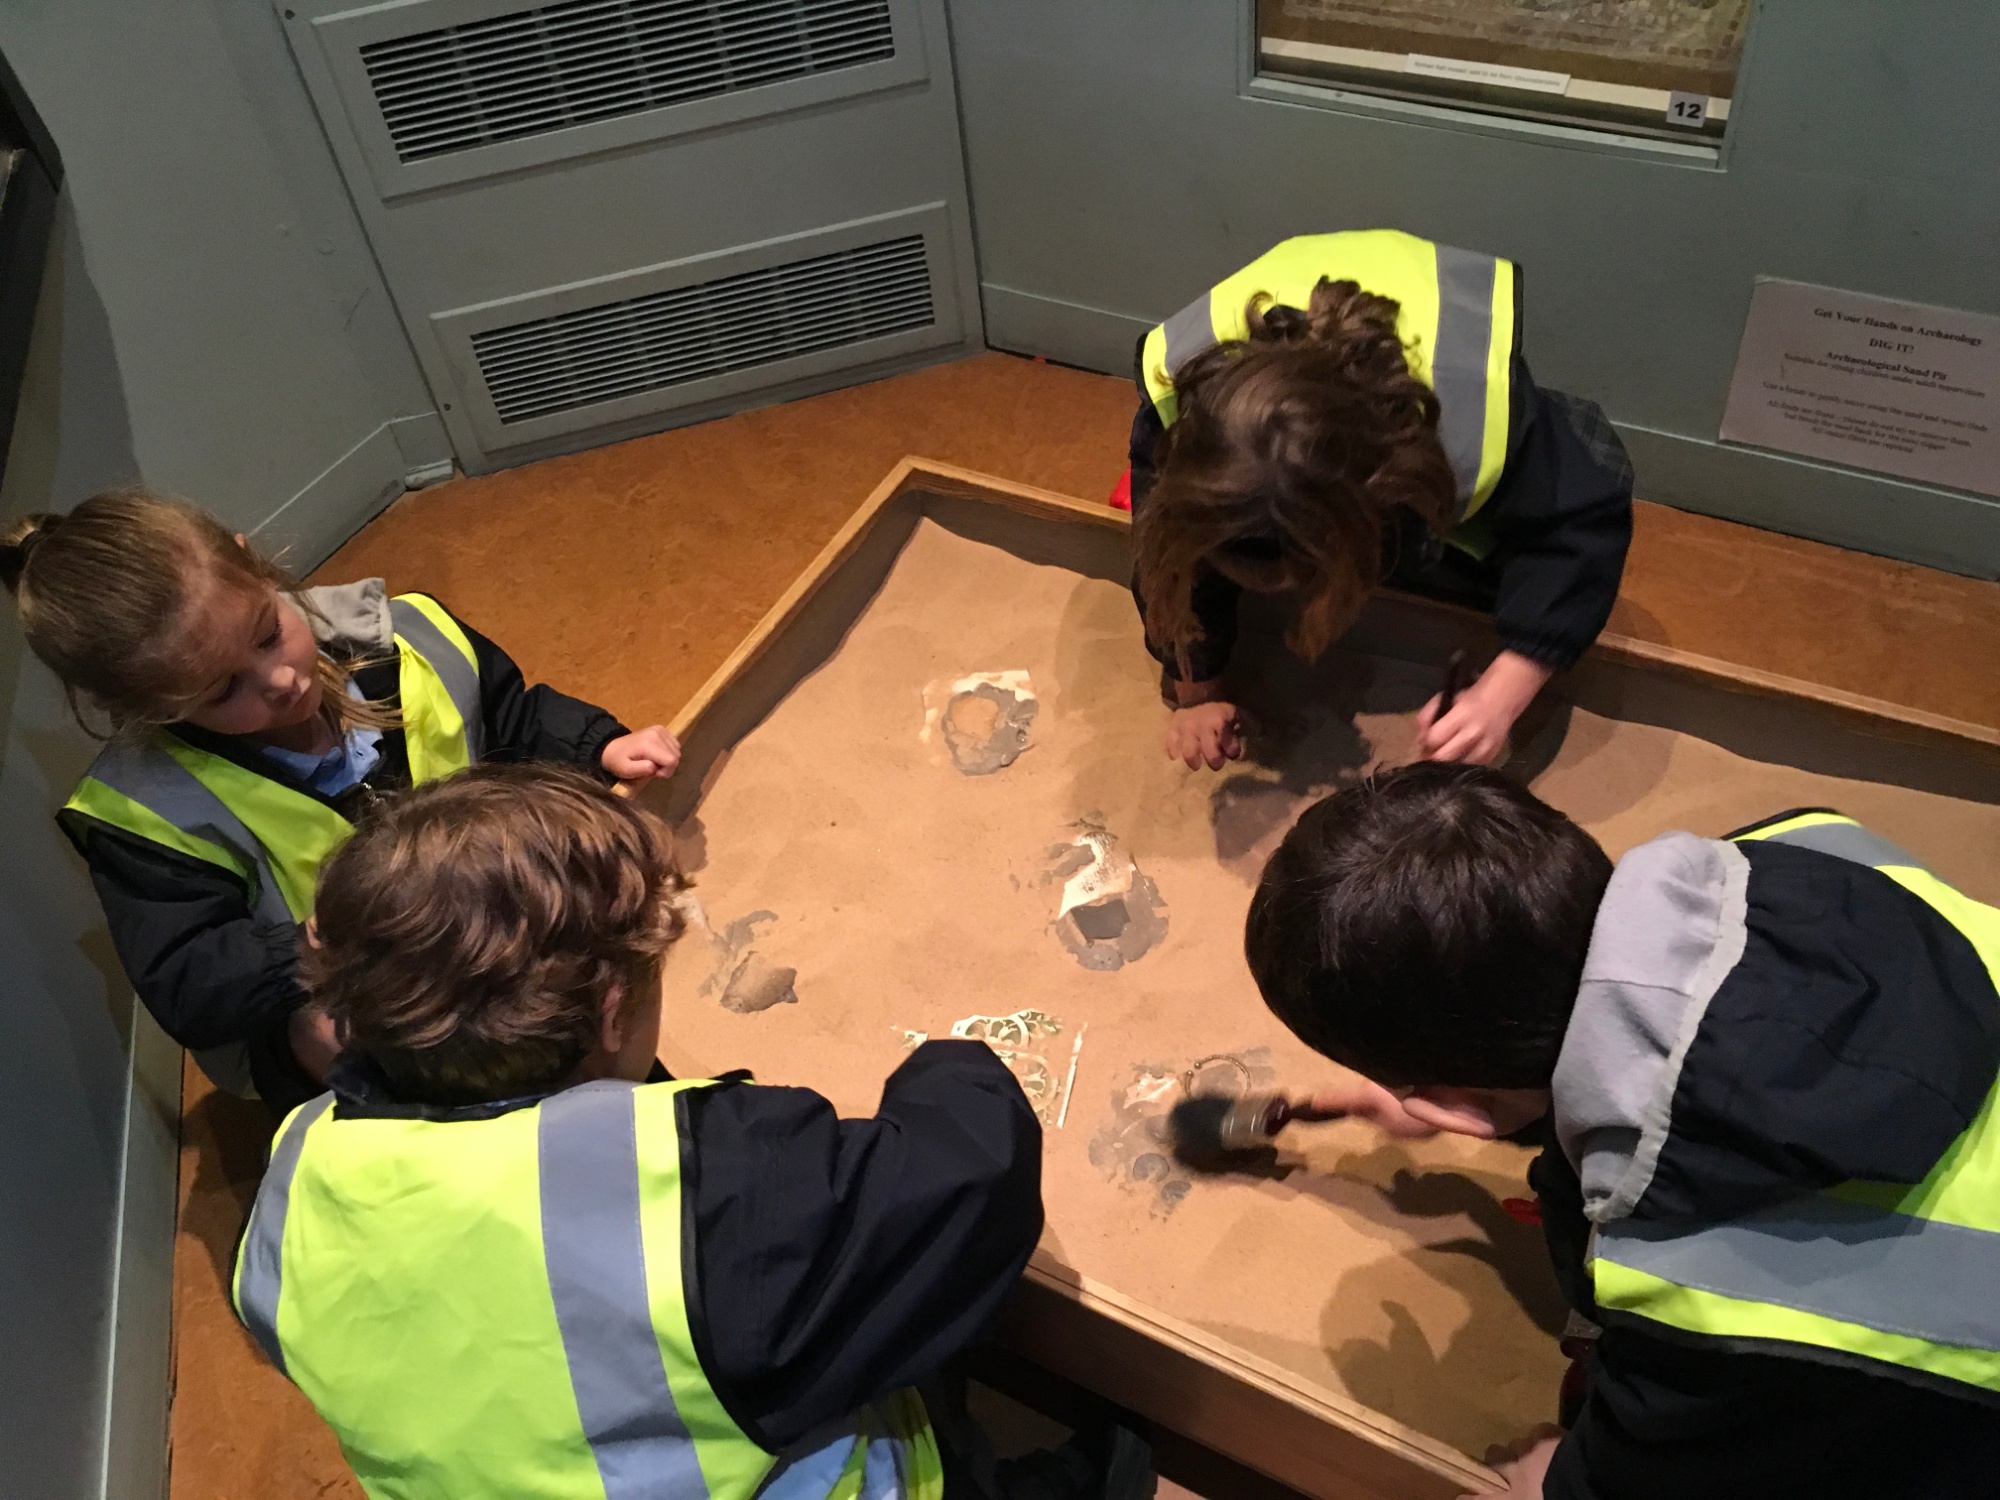 The pupils dig for artefacts in sand